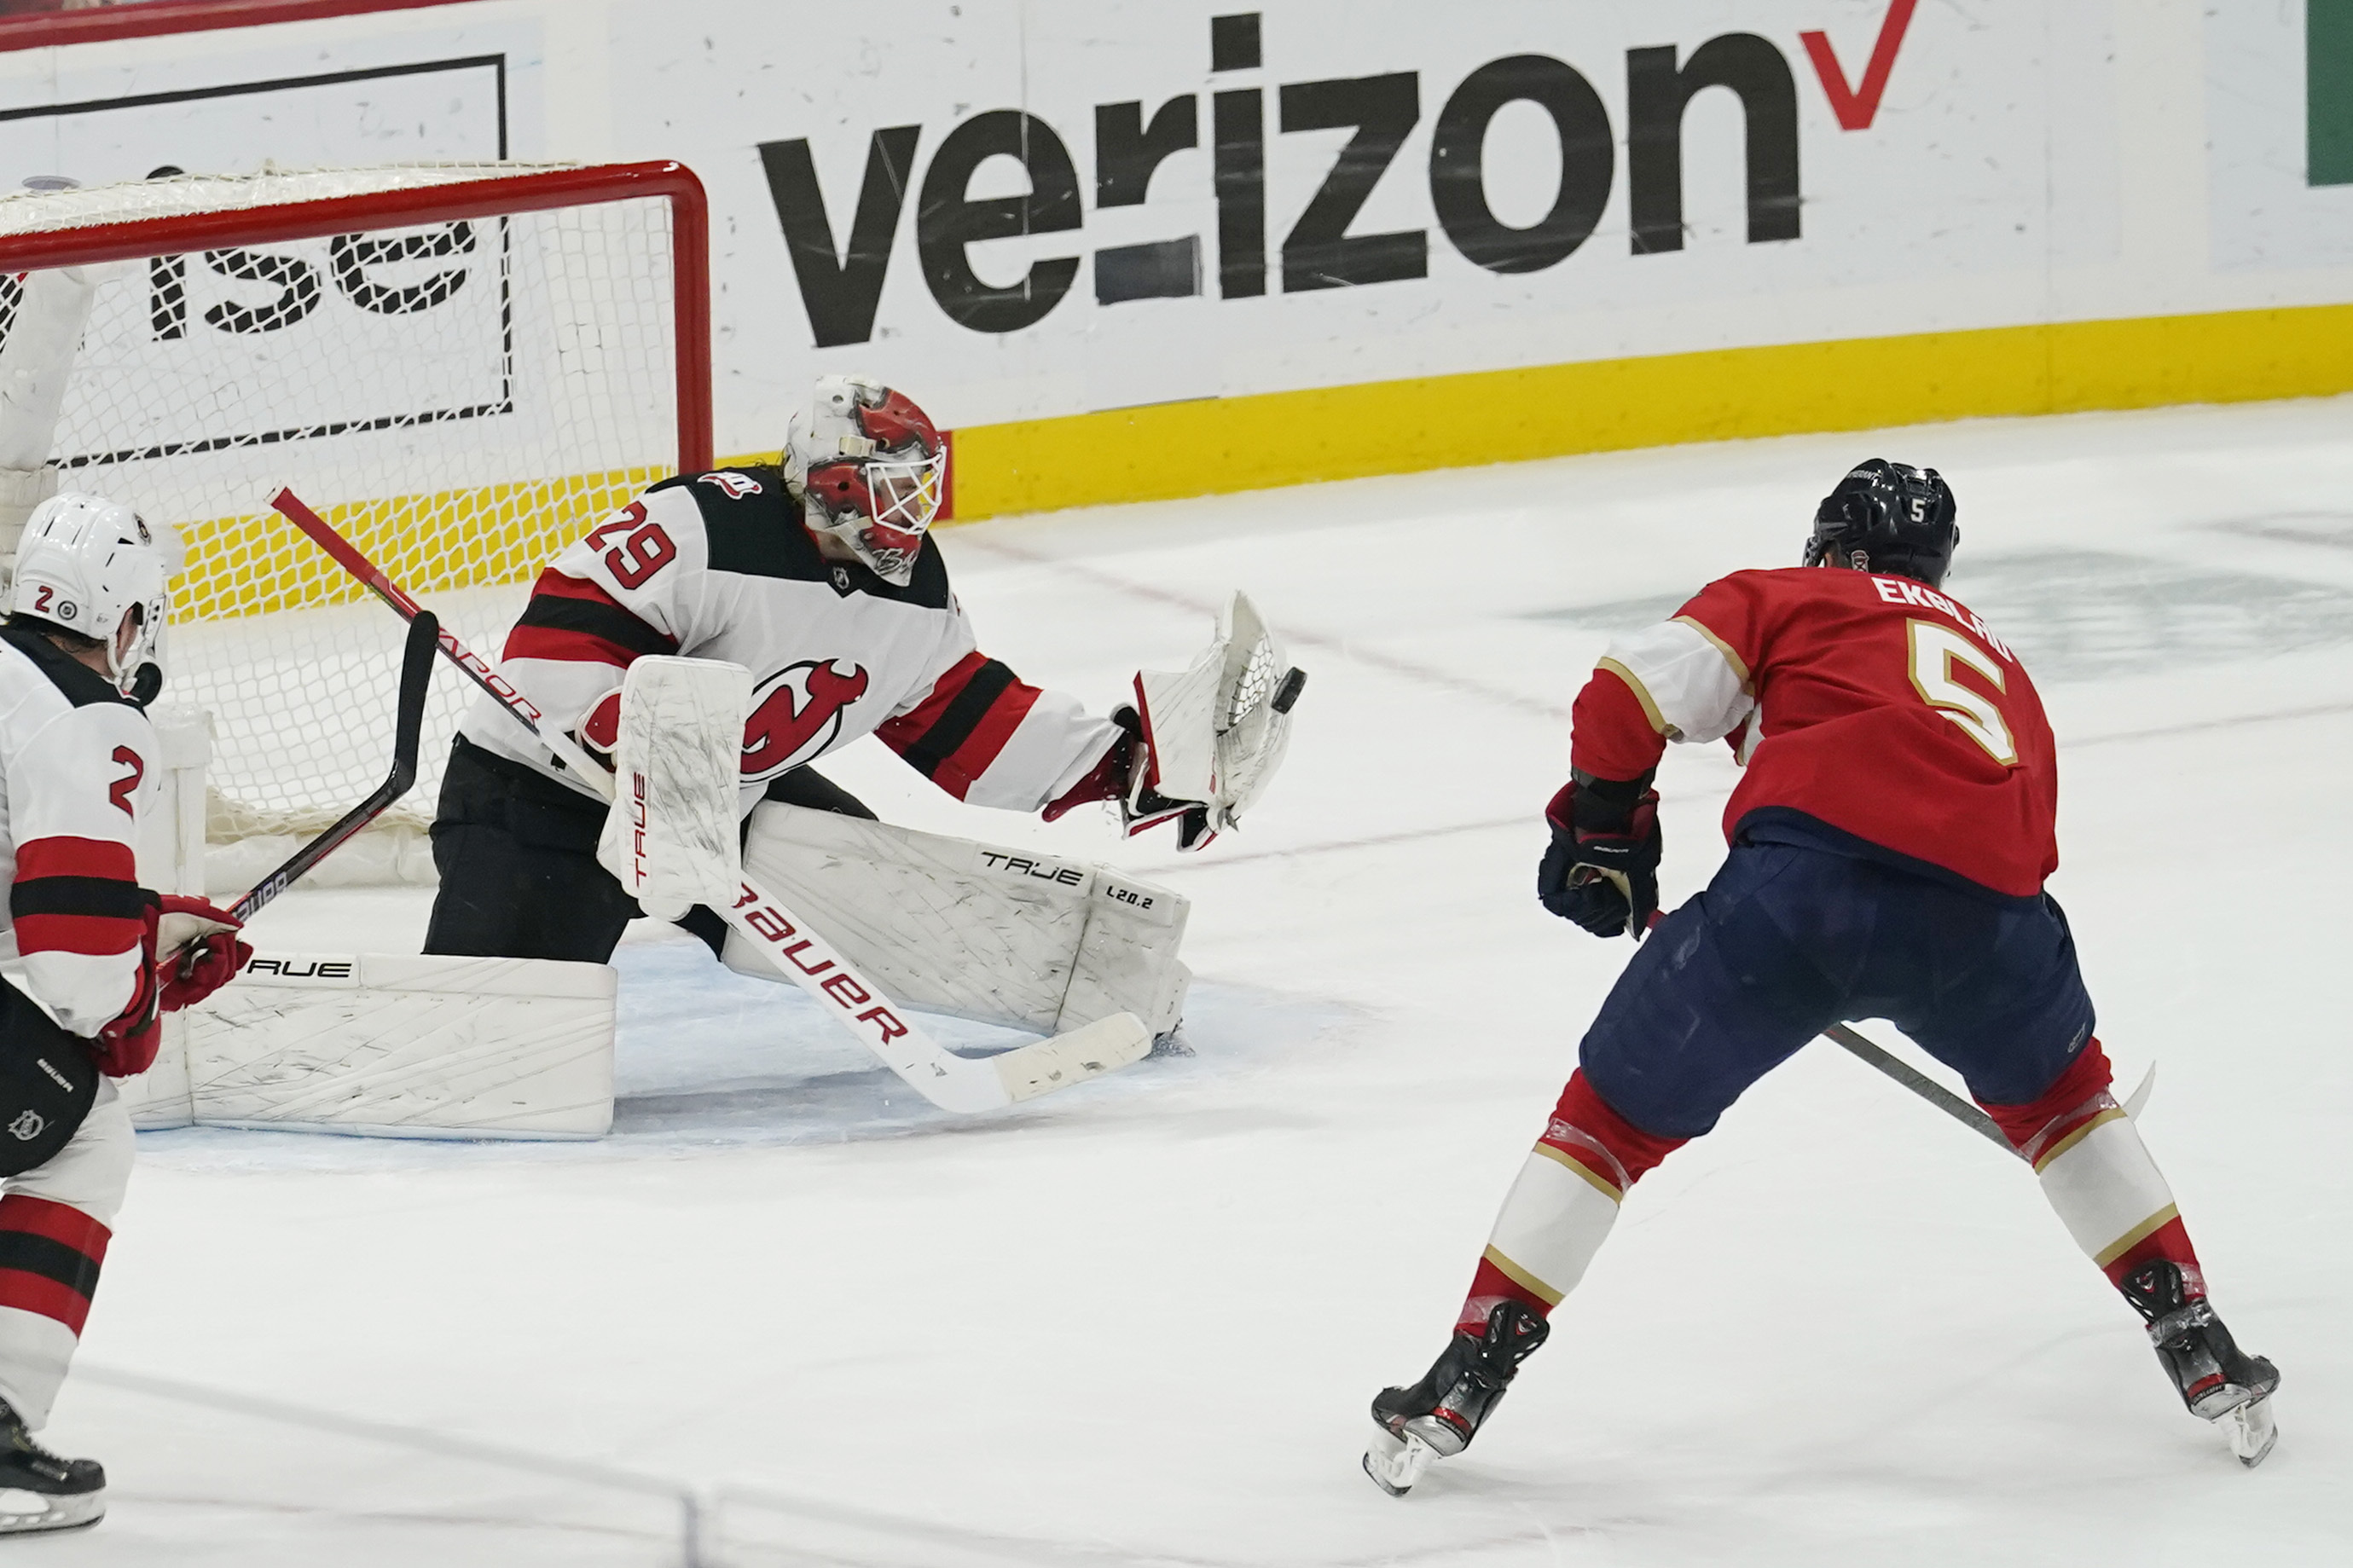 Panthers jump out to 4-0 lead, hold off Devils for first win of season